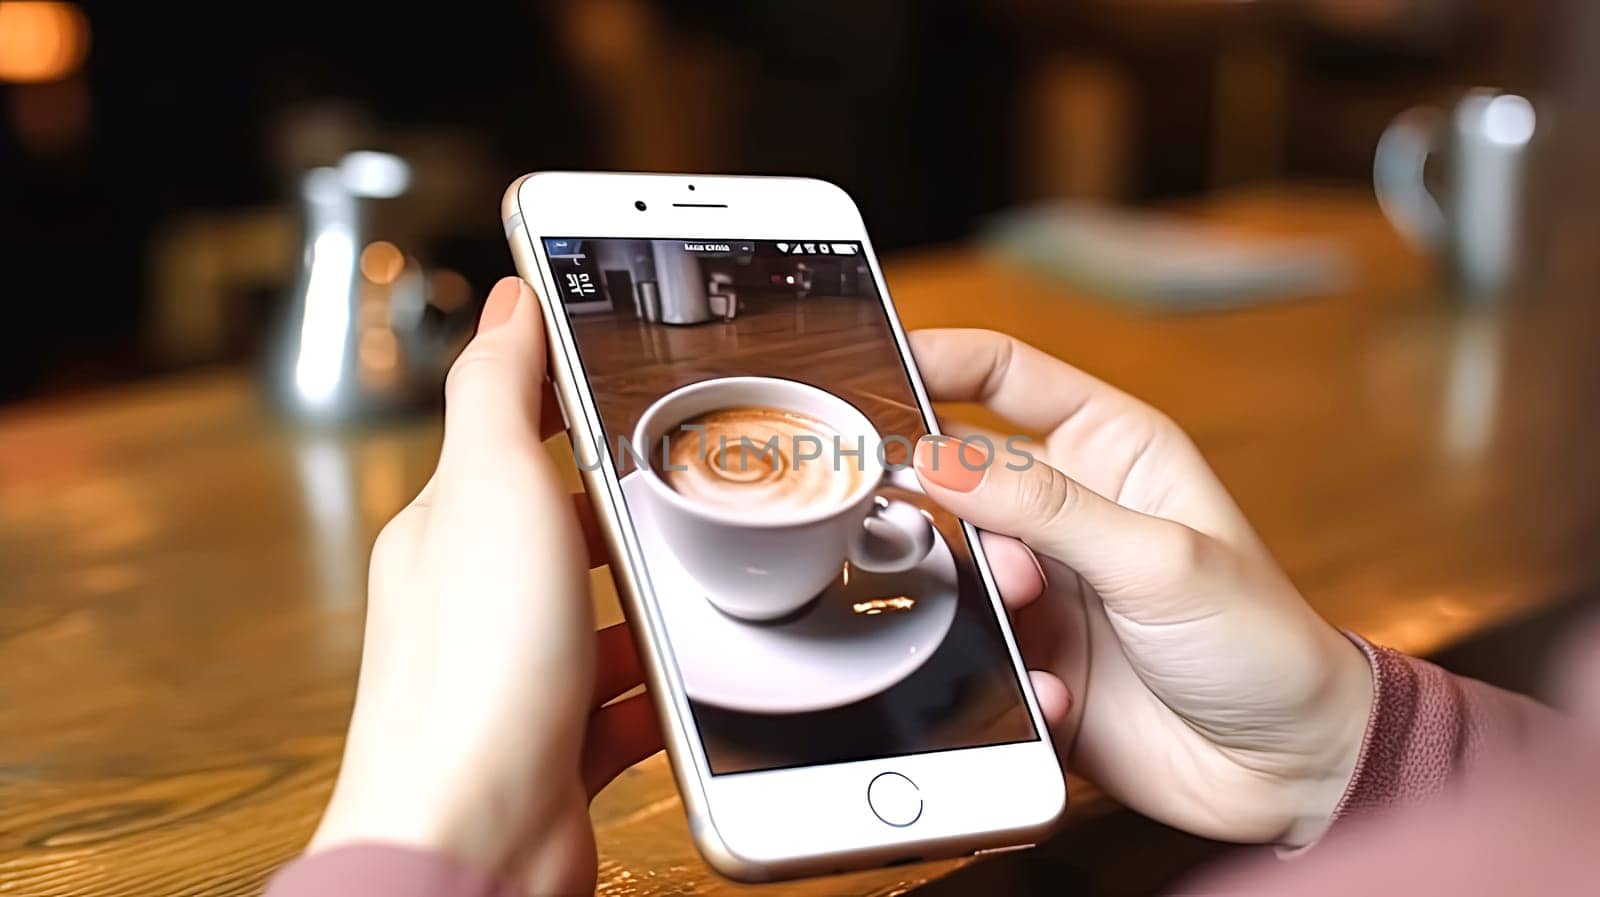 A person is holding a cell phone with a picture of a coffee cup on it. Concept of relaxation and enjoyment, as the person is likely to be sipping their coffee while looking at the photo